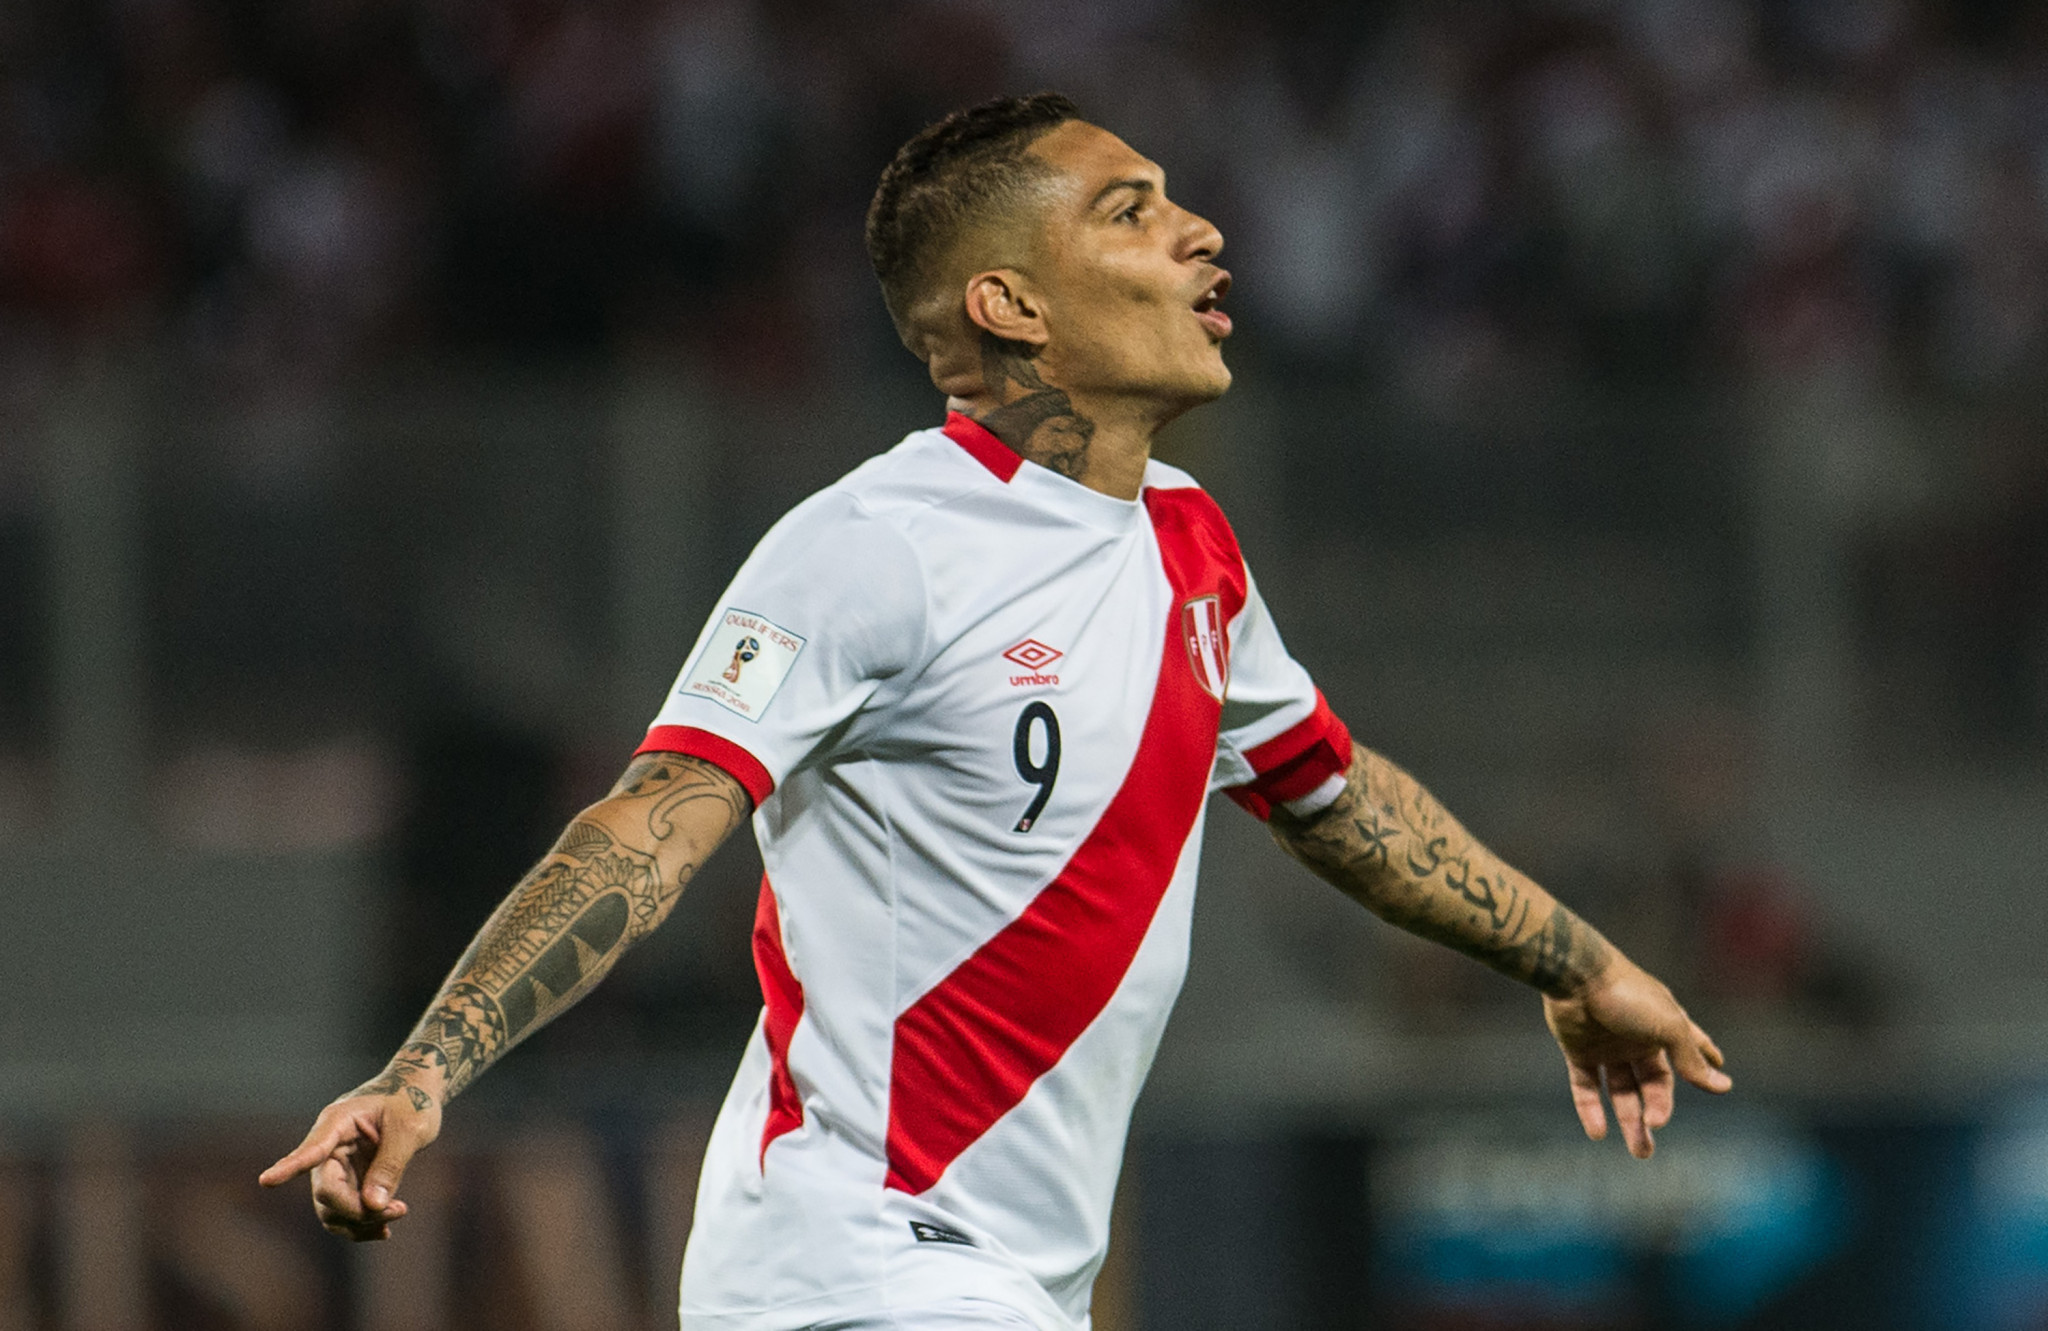 Paolo Guerrero's eligibility to play at this summer's World Cup is still up in the air ©Getty Images